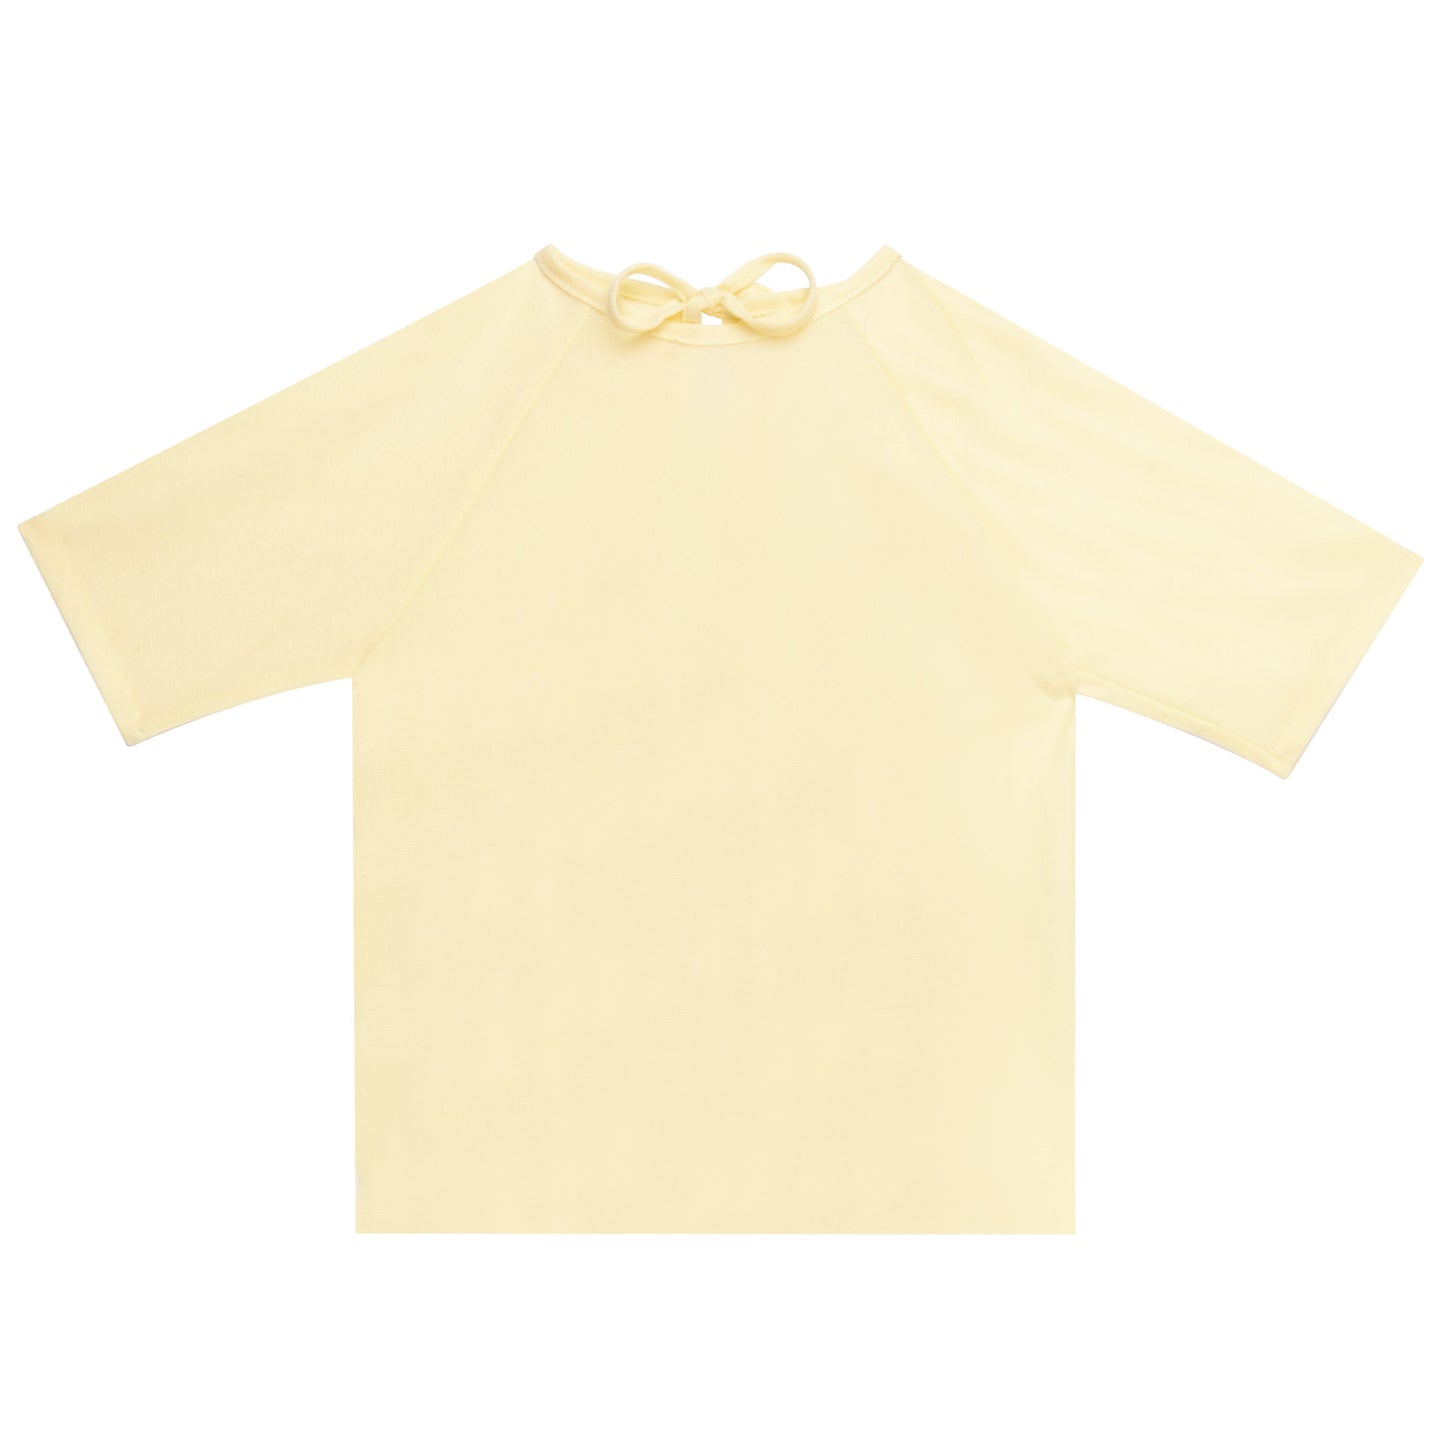 American Dawn | Small Yellow Pediatric Apparel | Pediatric Gown With Short Sleeves And 